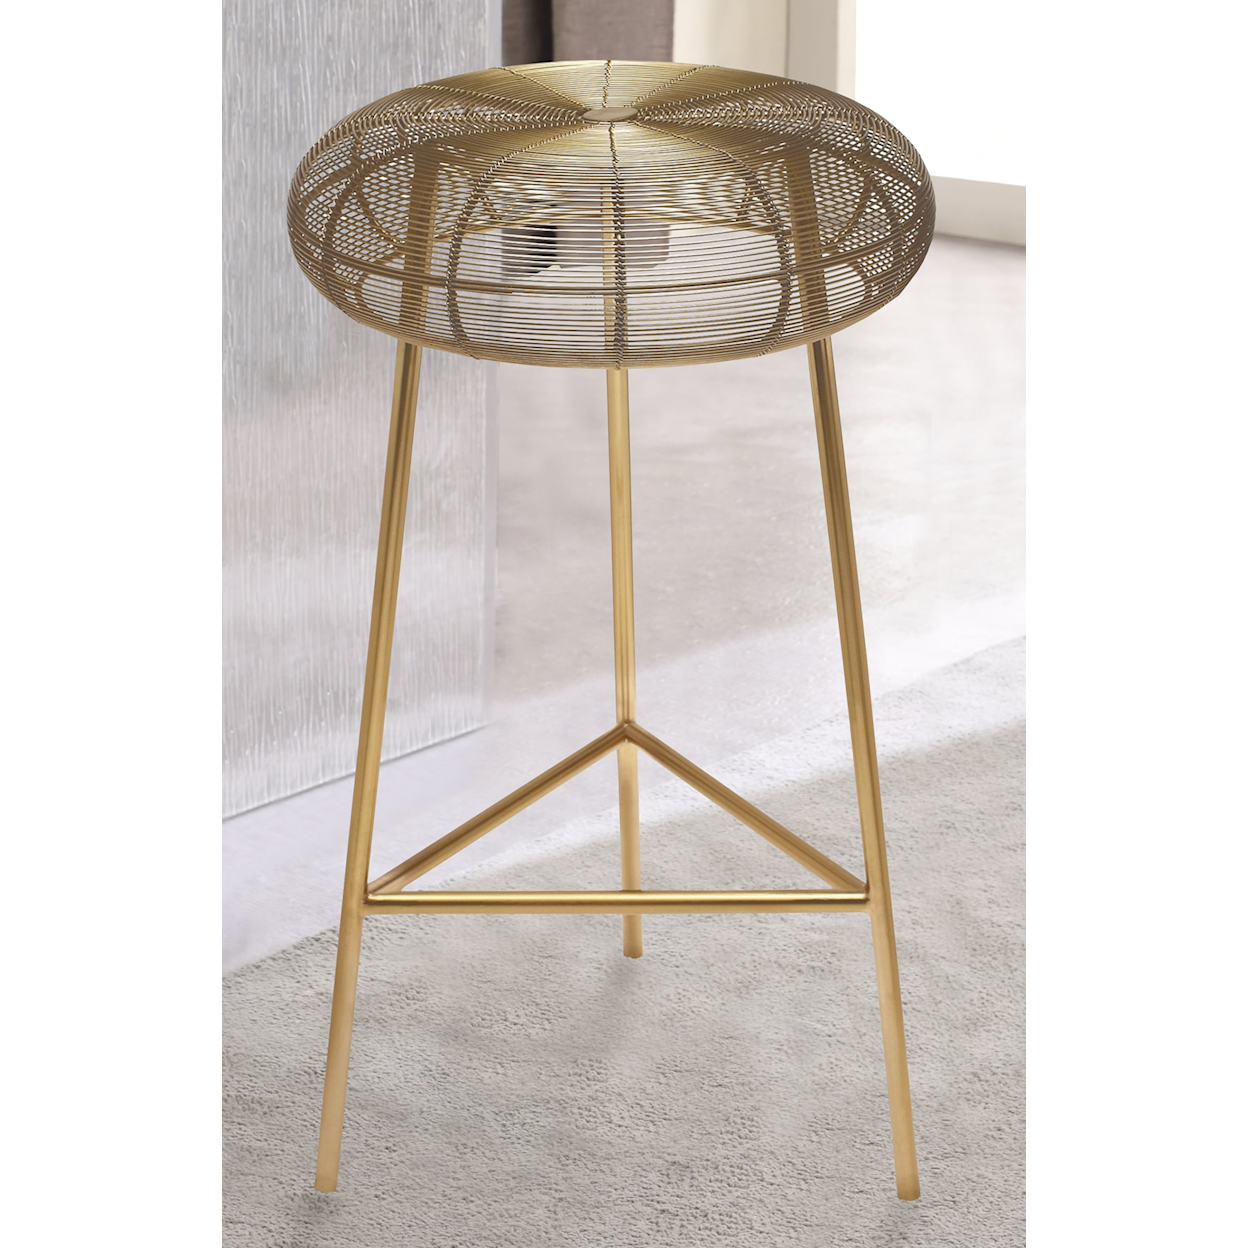 Meridian Furniture Tuscany Counter-Height Stool